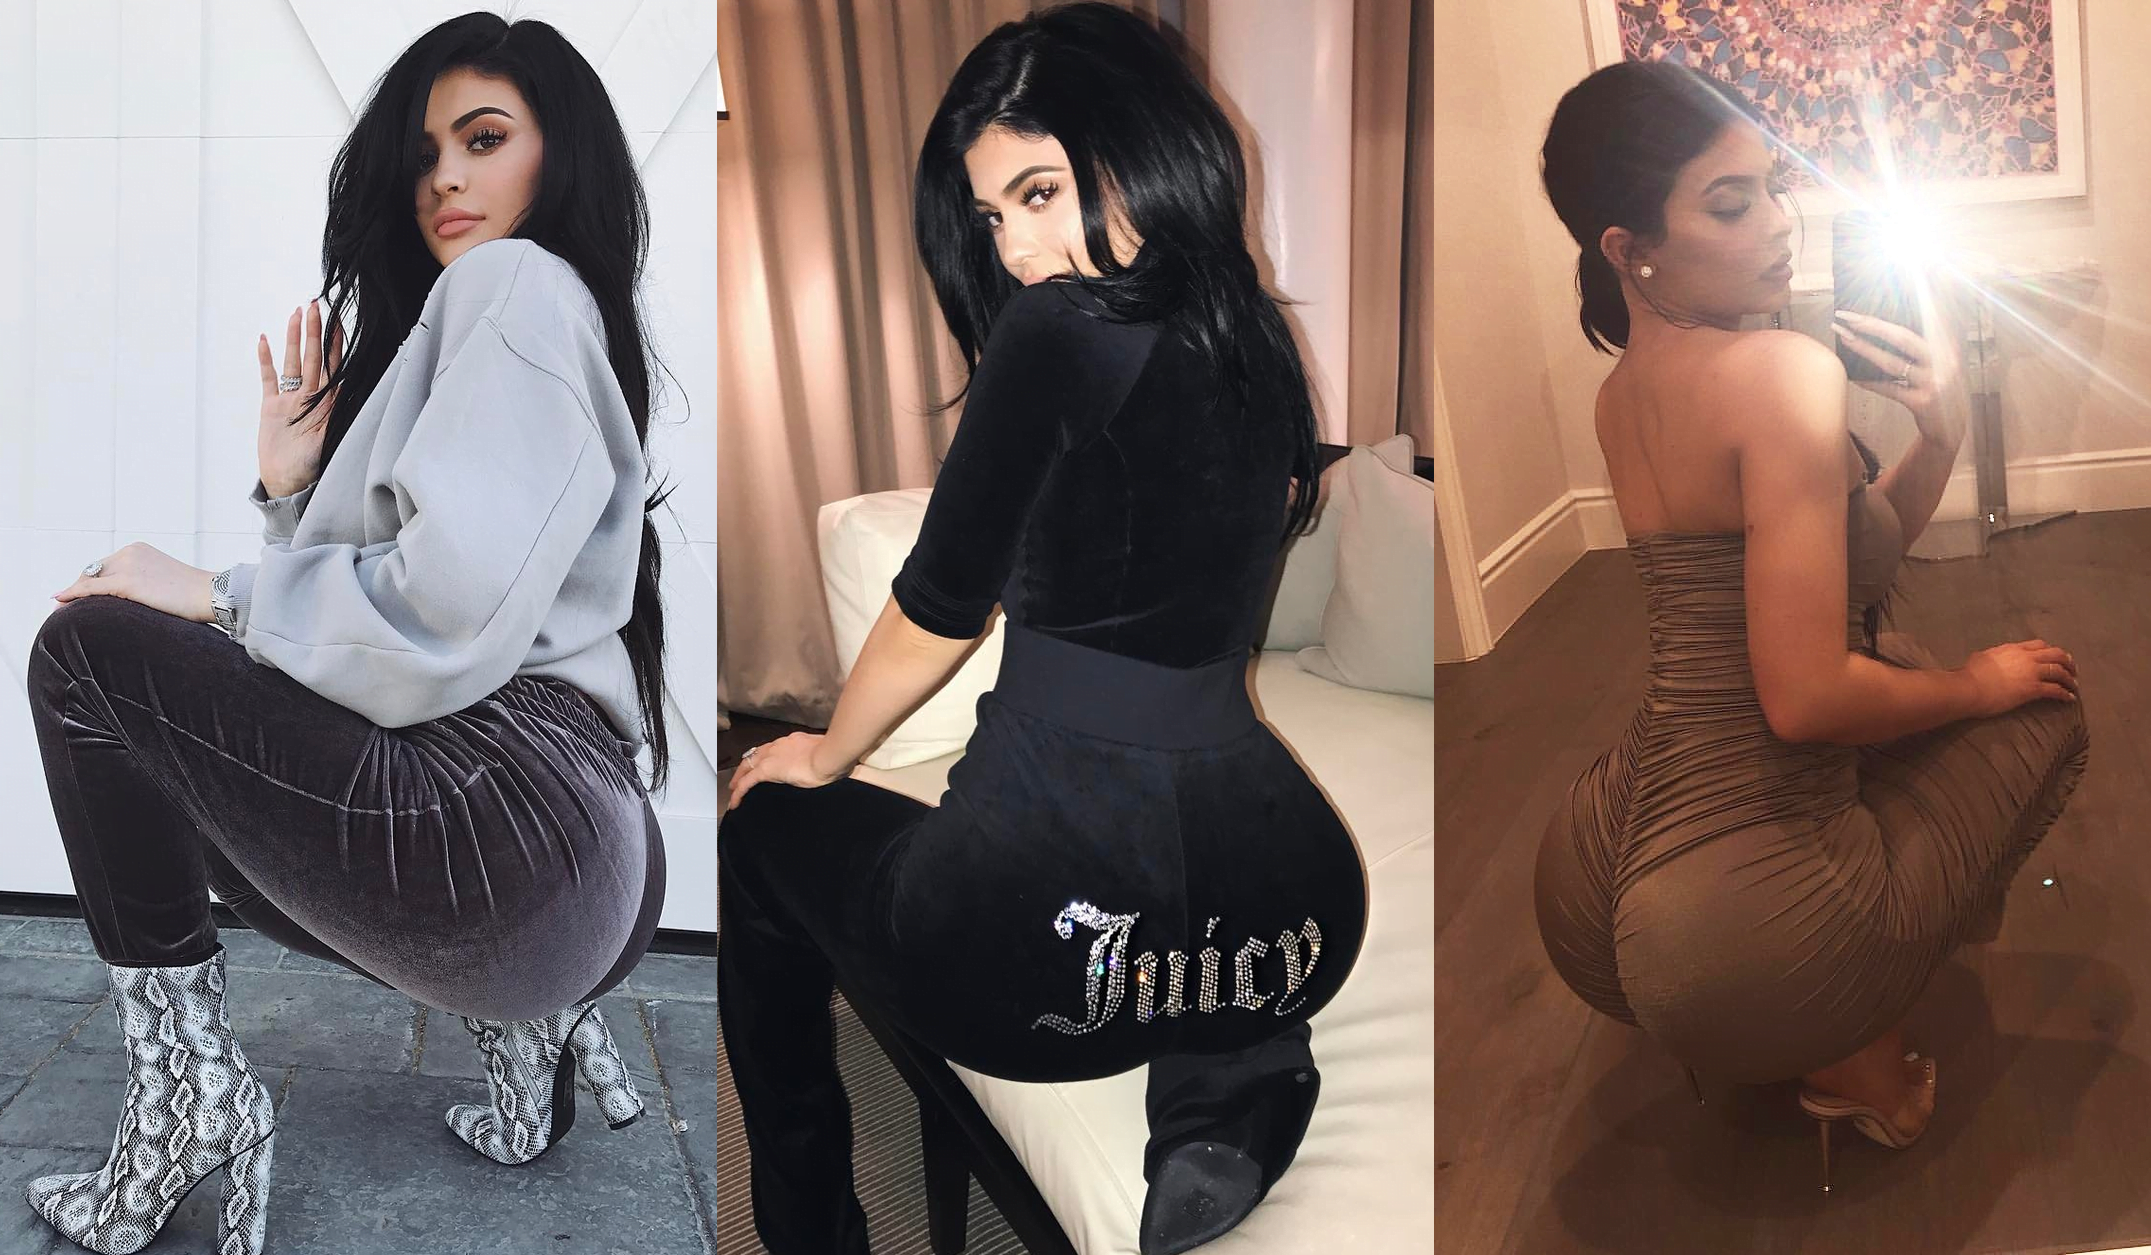 Obsessed with Kylie Jenner would do anything as her subby